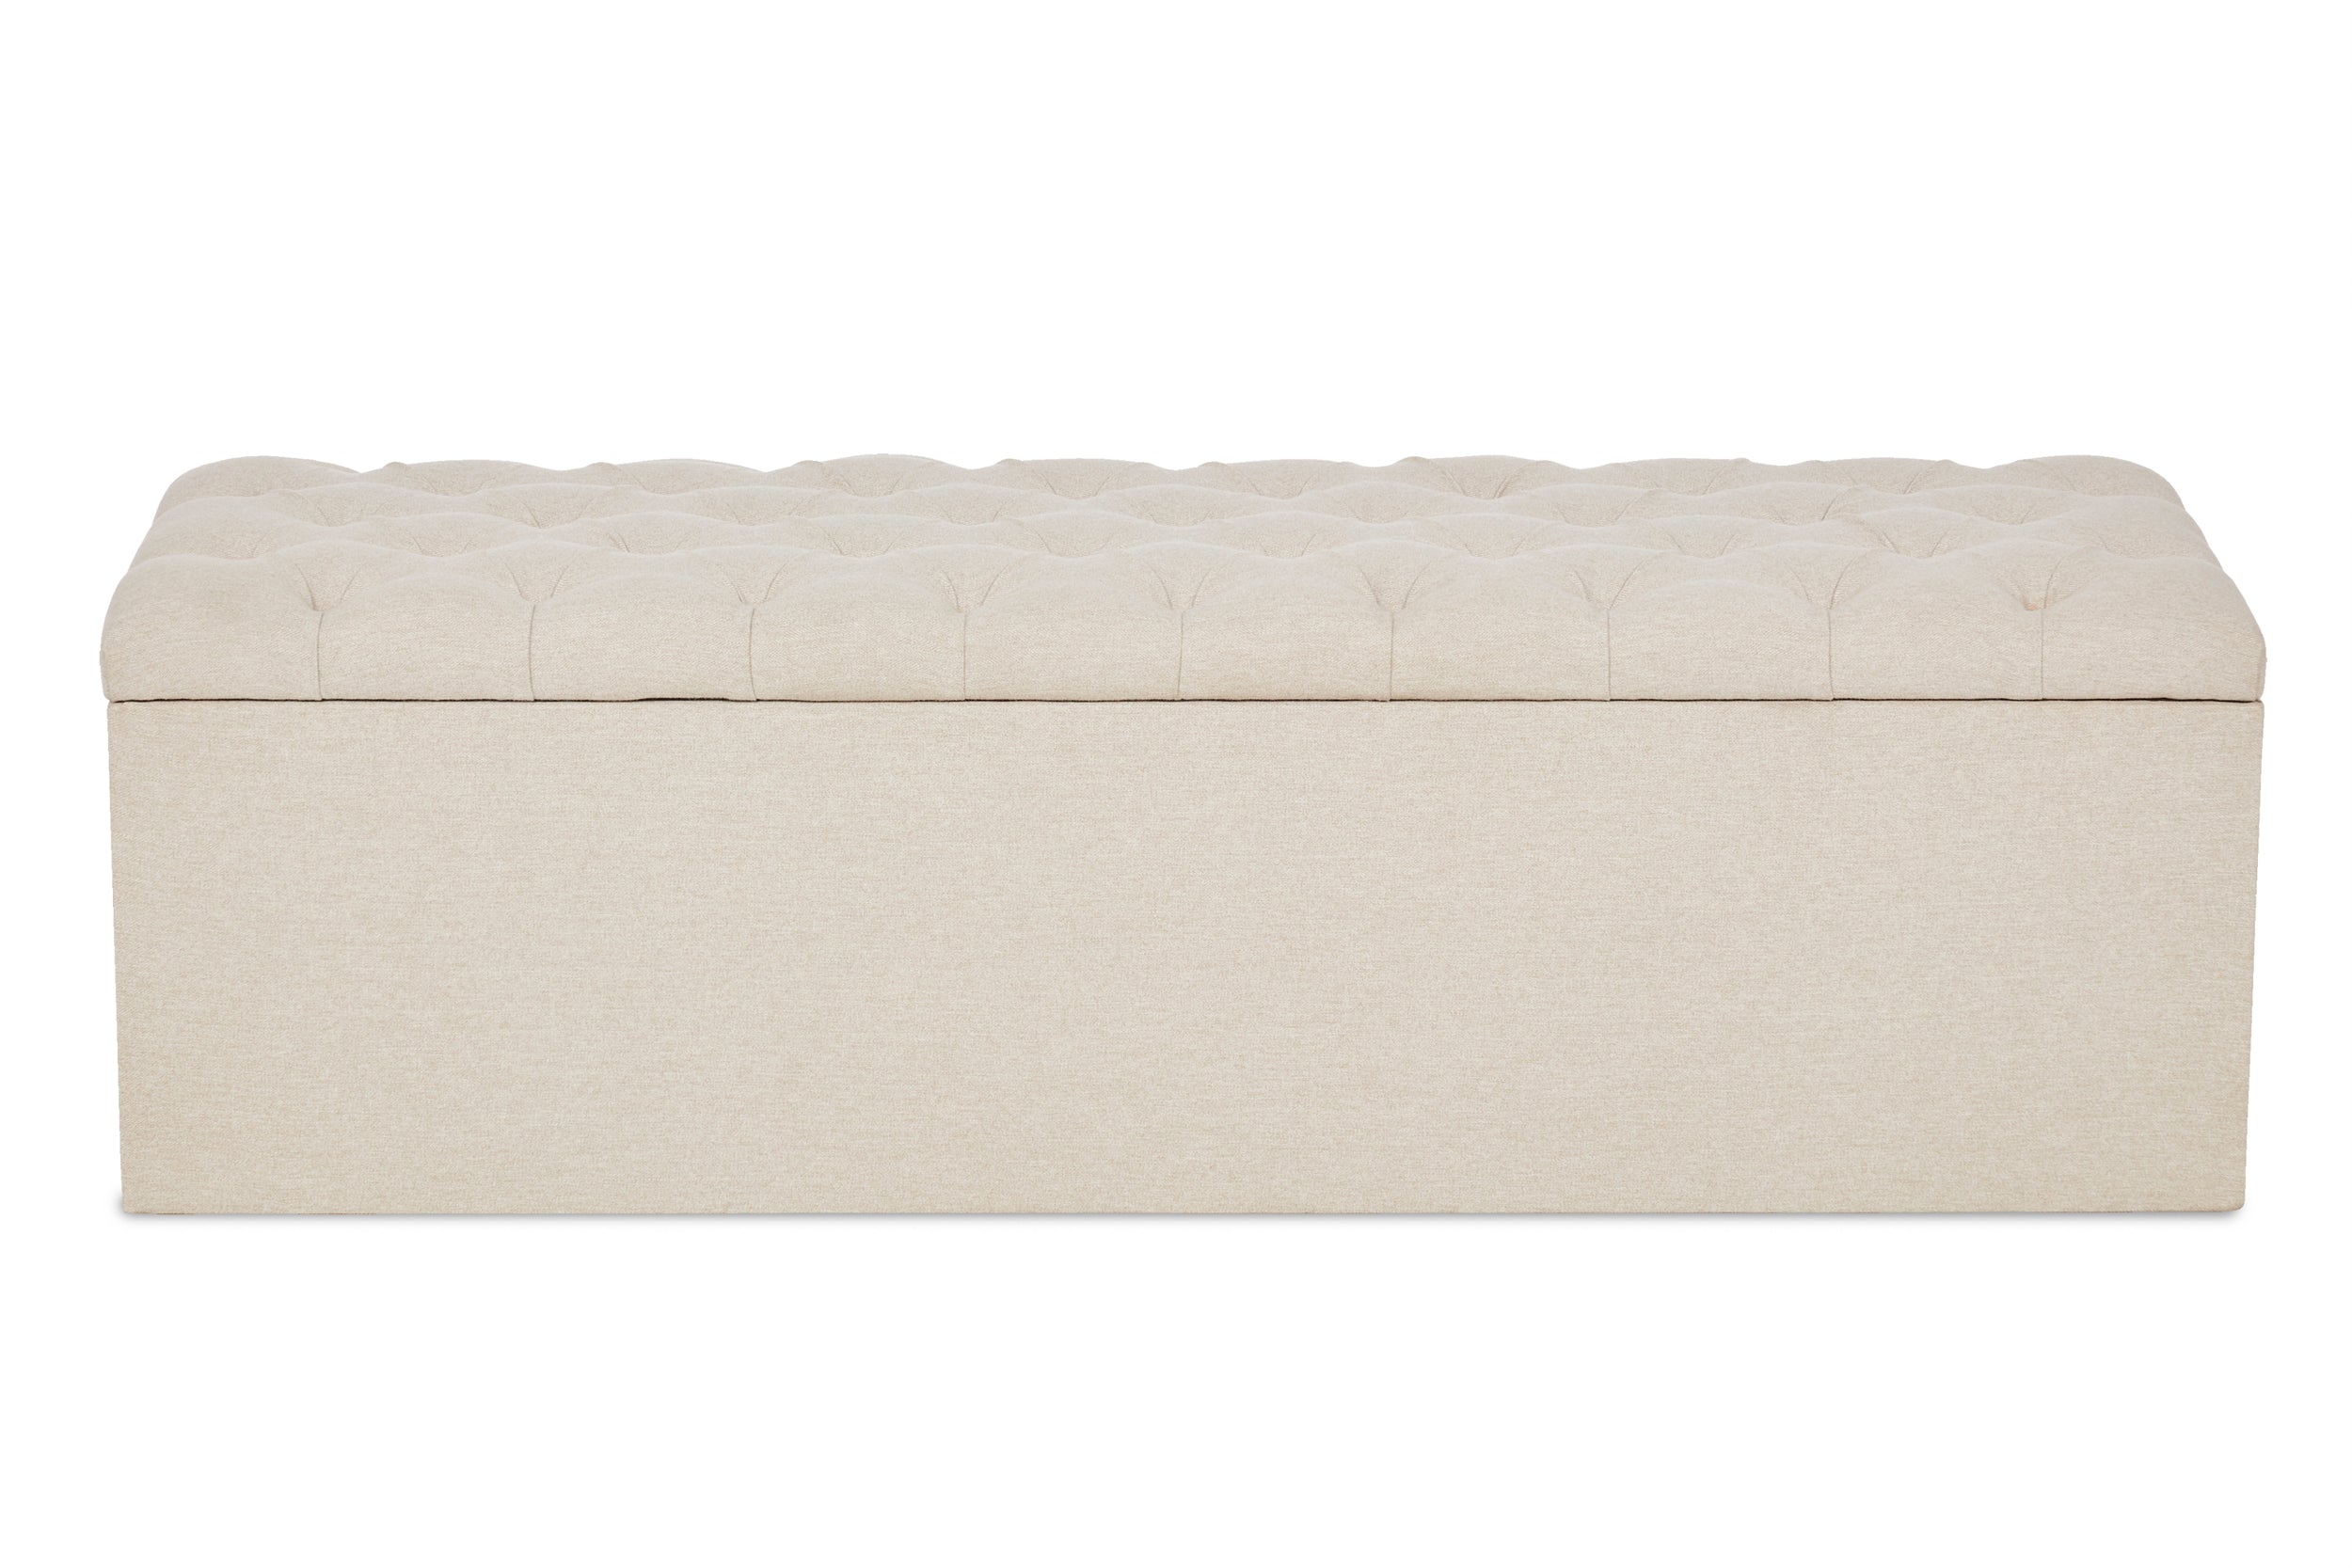 Harrison Chesterfield Style Fabric Blanket Box